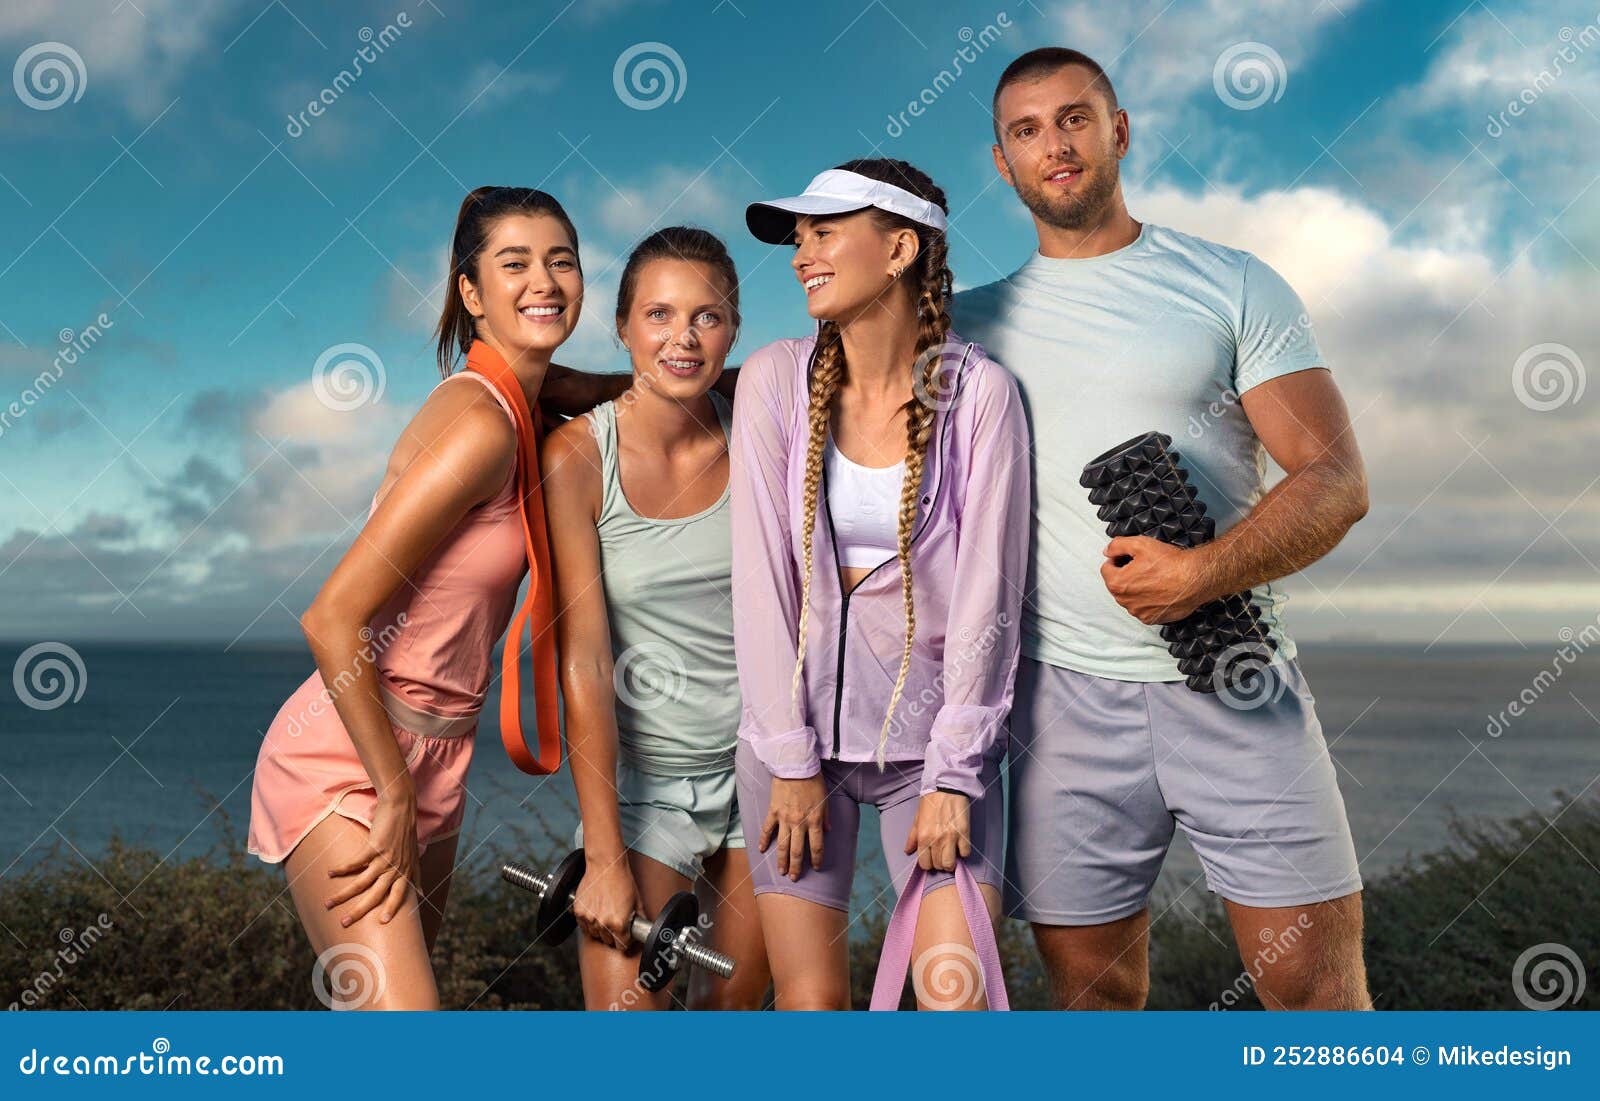 Certified Group Exercise Instructor and His Fitness Team. Premium